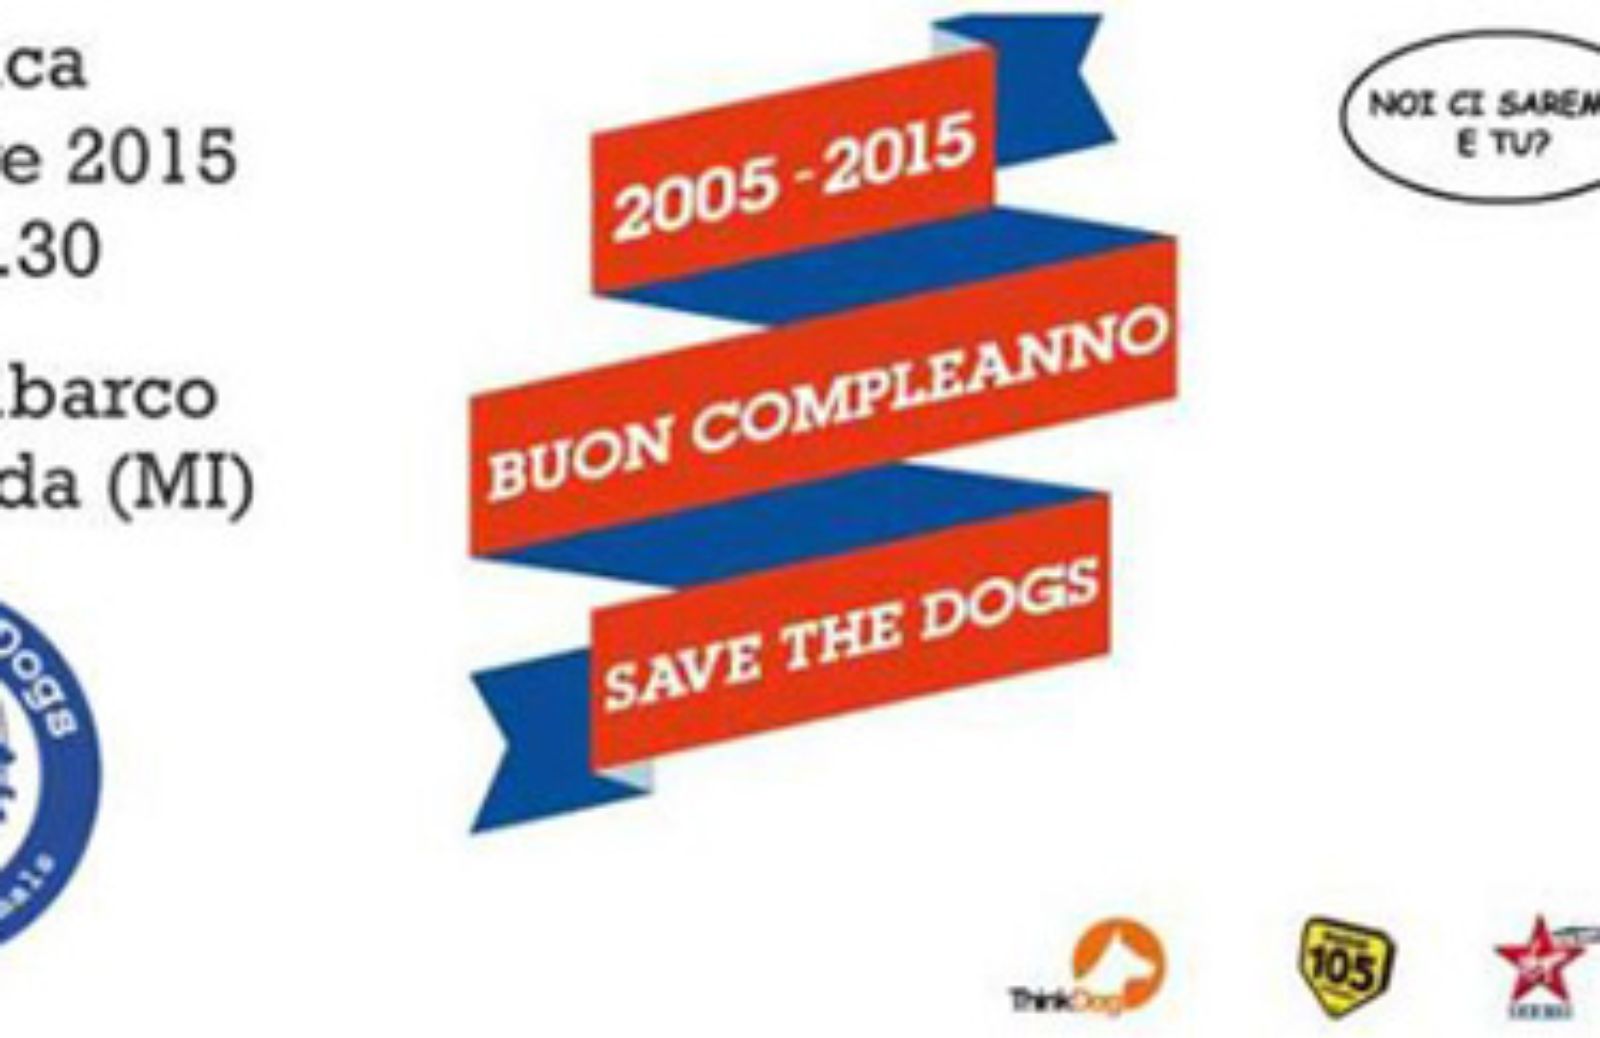 Save The Dogs compie 10 anni